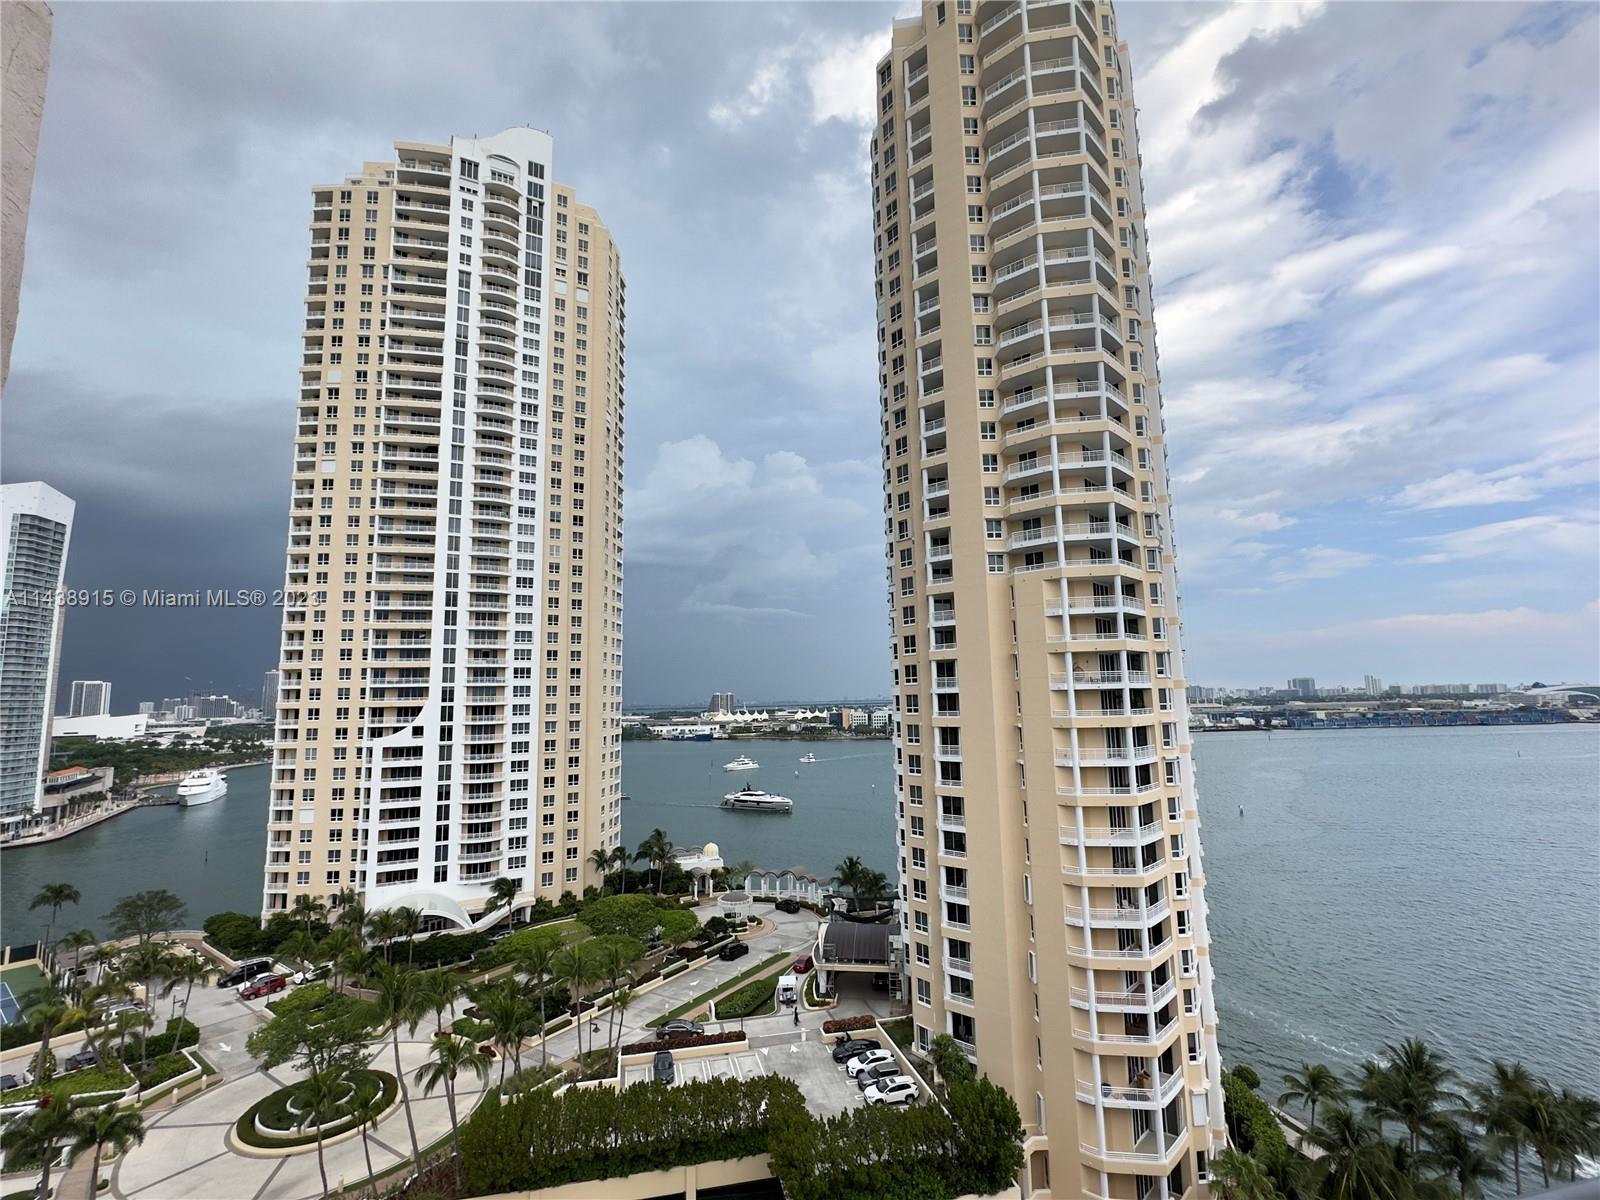 Enjoy Breathtaking water views from your balcony and Bedrooms in this Stunning PH apartment in Exclusive Brickell Key Island. Beautiful 2bed/2bath Master suites where you can relax watching the boats pass. Freshly painted and ready to move in to the most sought after location in Miami. Walk to the Financial District, Brickell City Centre, Mary Brickell Village, fantastic entertainment, dining, and shopping. Brickell Key II has recently been renovated, new Lobby, Resort-style amenities, Salt-water pool, jacuzzi, tennis courts, racquet ball, gym, sauna, BBQ, convenience store, valet and 24hr security and concierge. Brickell Key features a one mile landscaped walking trail around the island, accessible from the building. 1 Parking space assigned in garage and additional space for rent.